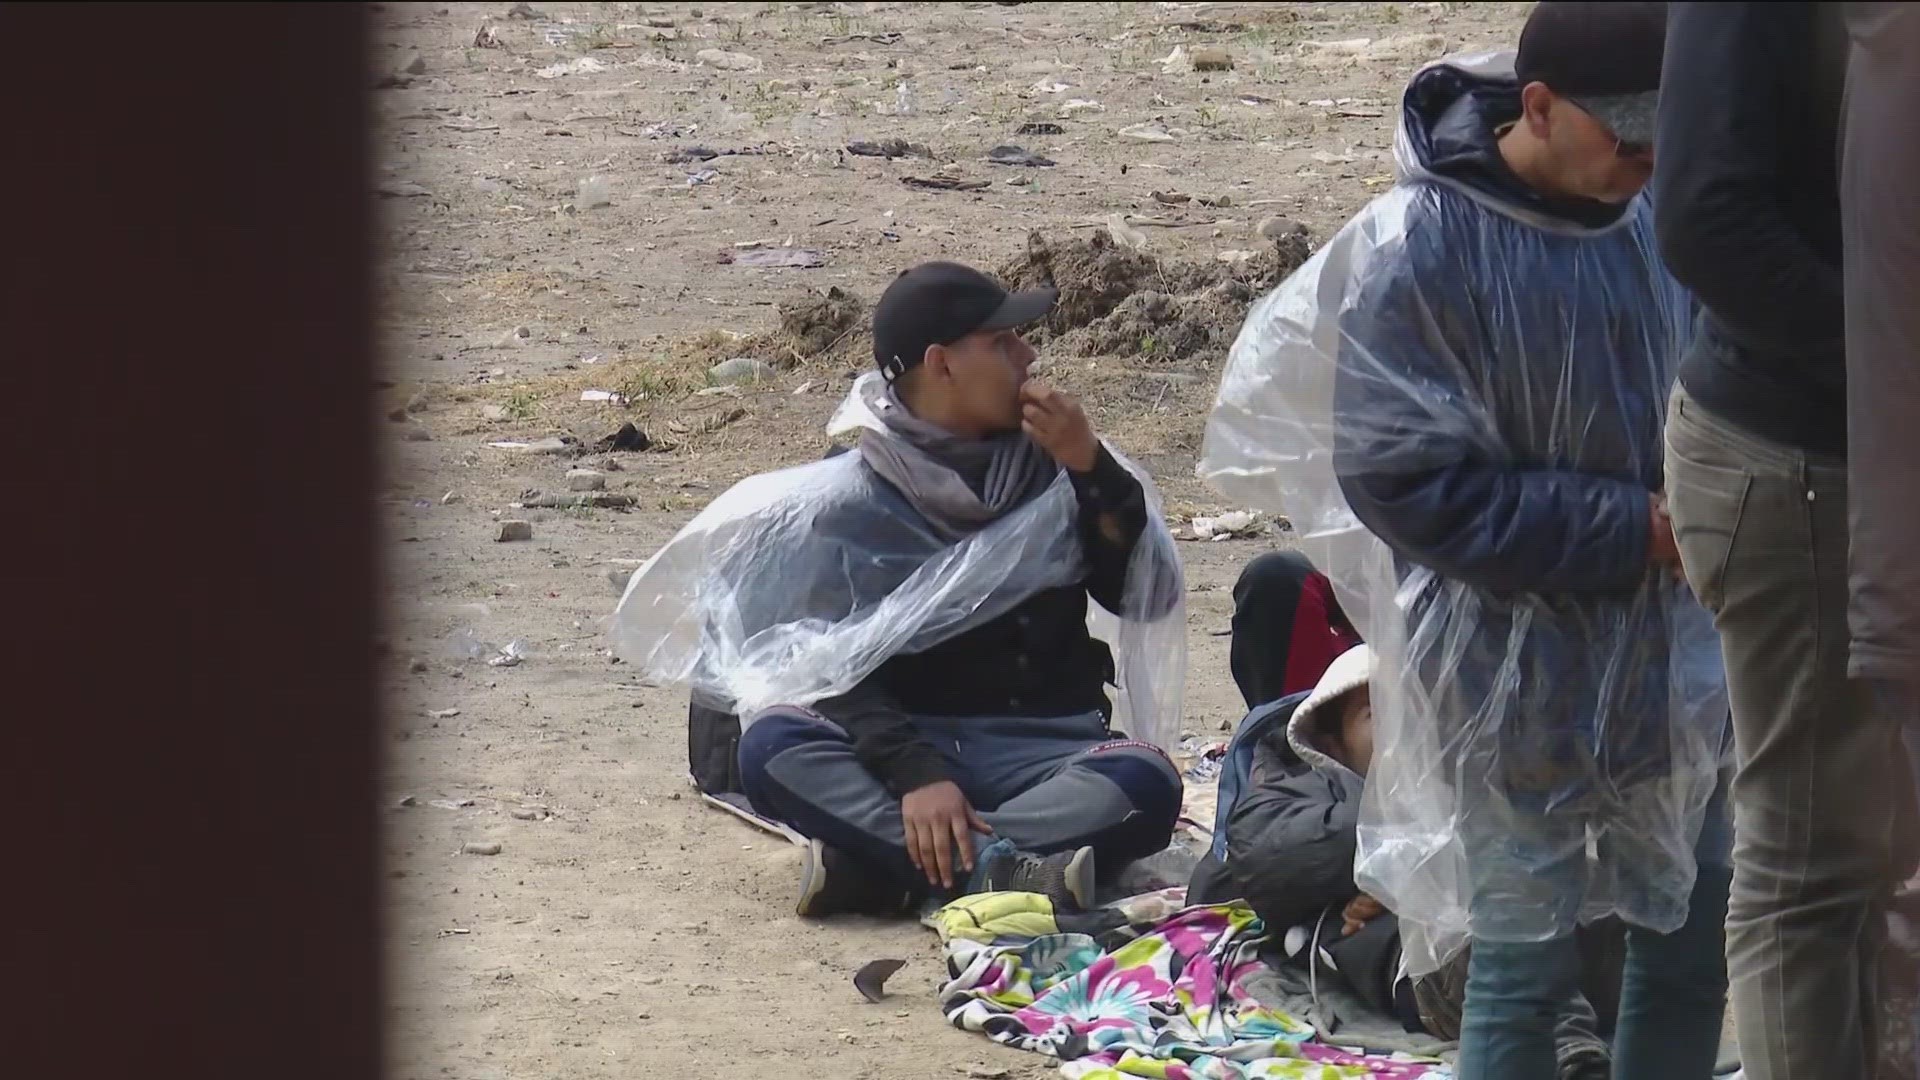 Migrants continued to wait at the US-Mexico border in anticipation of Title 42 expiring one week from now.